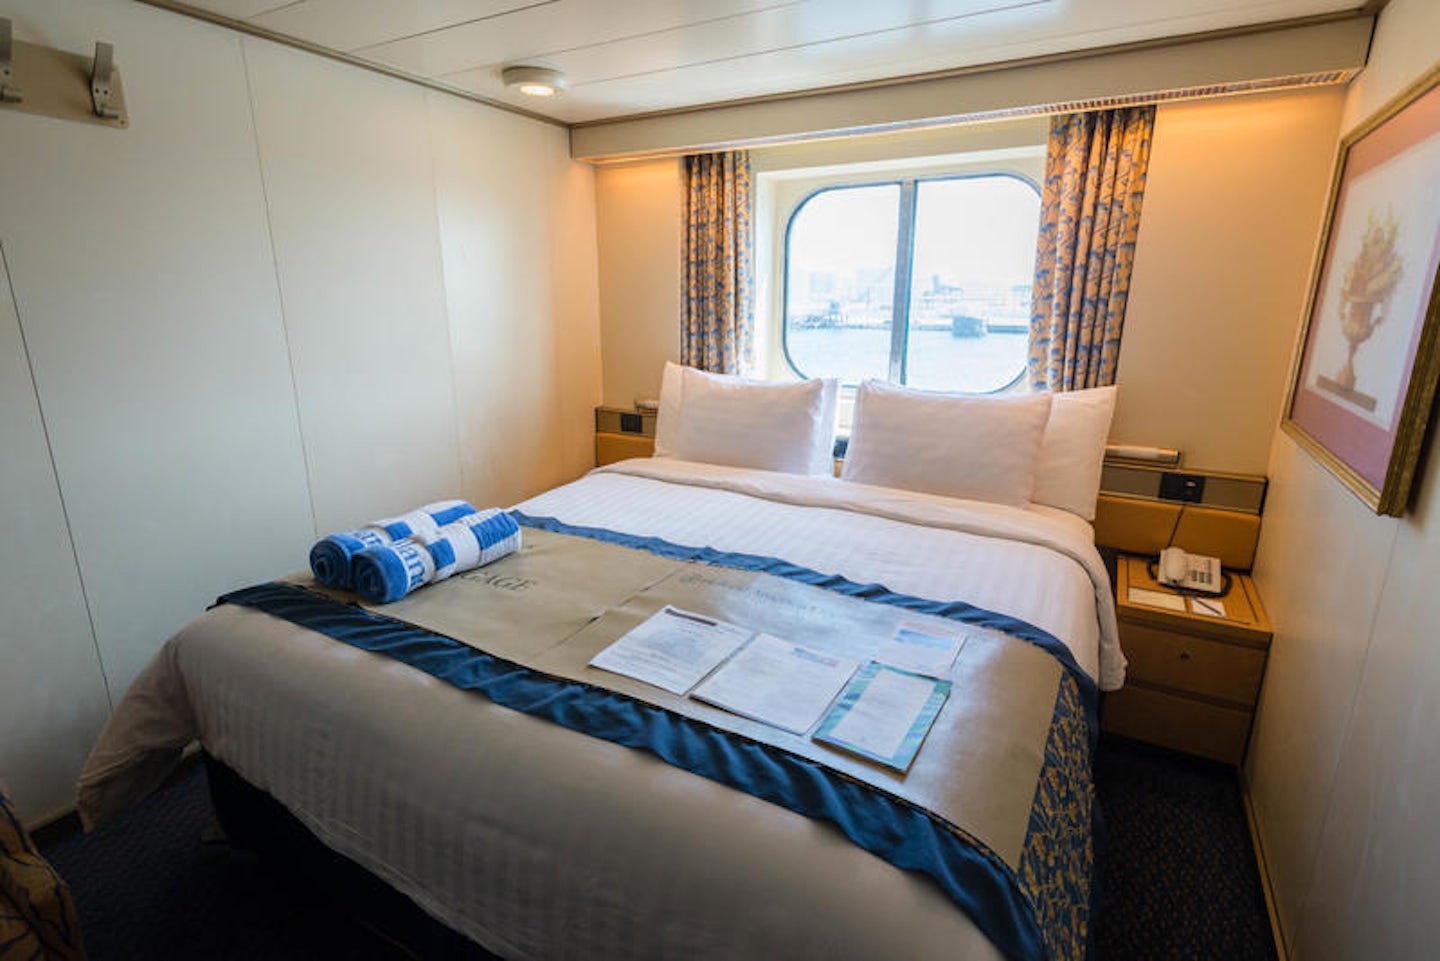 The Ocean-View Cabin on Oosterdam